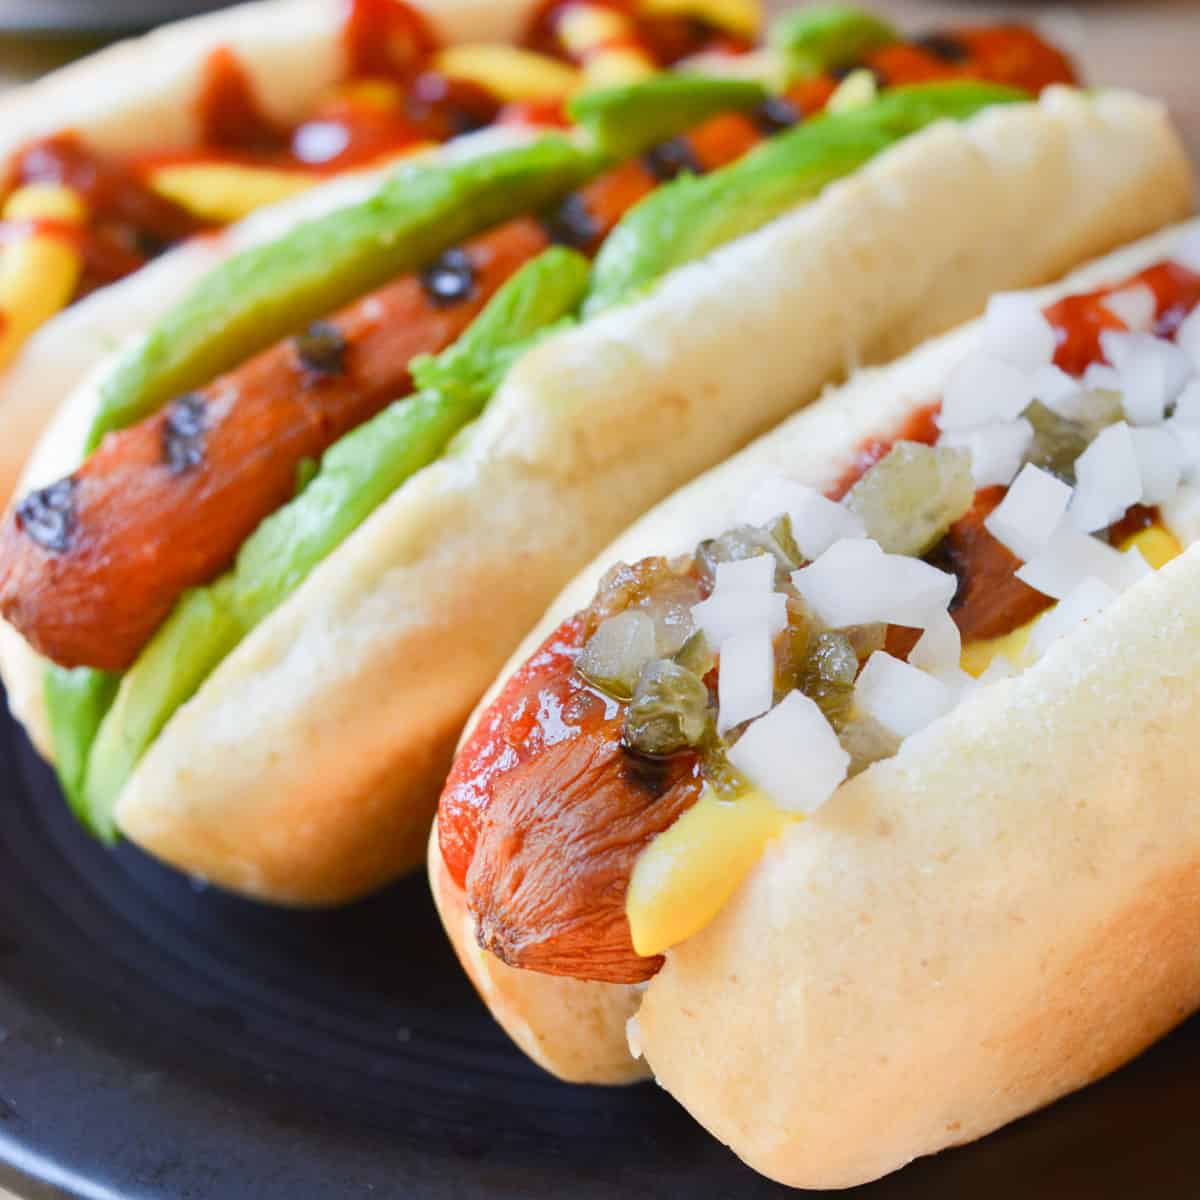 Vegan carrot hot dog topped with mustard, ketchup, relish, and diced white onion.